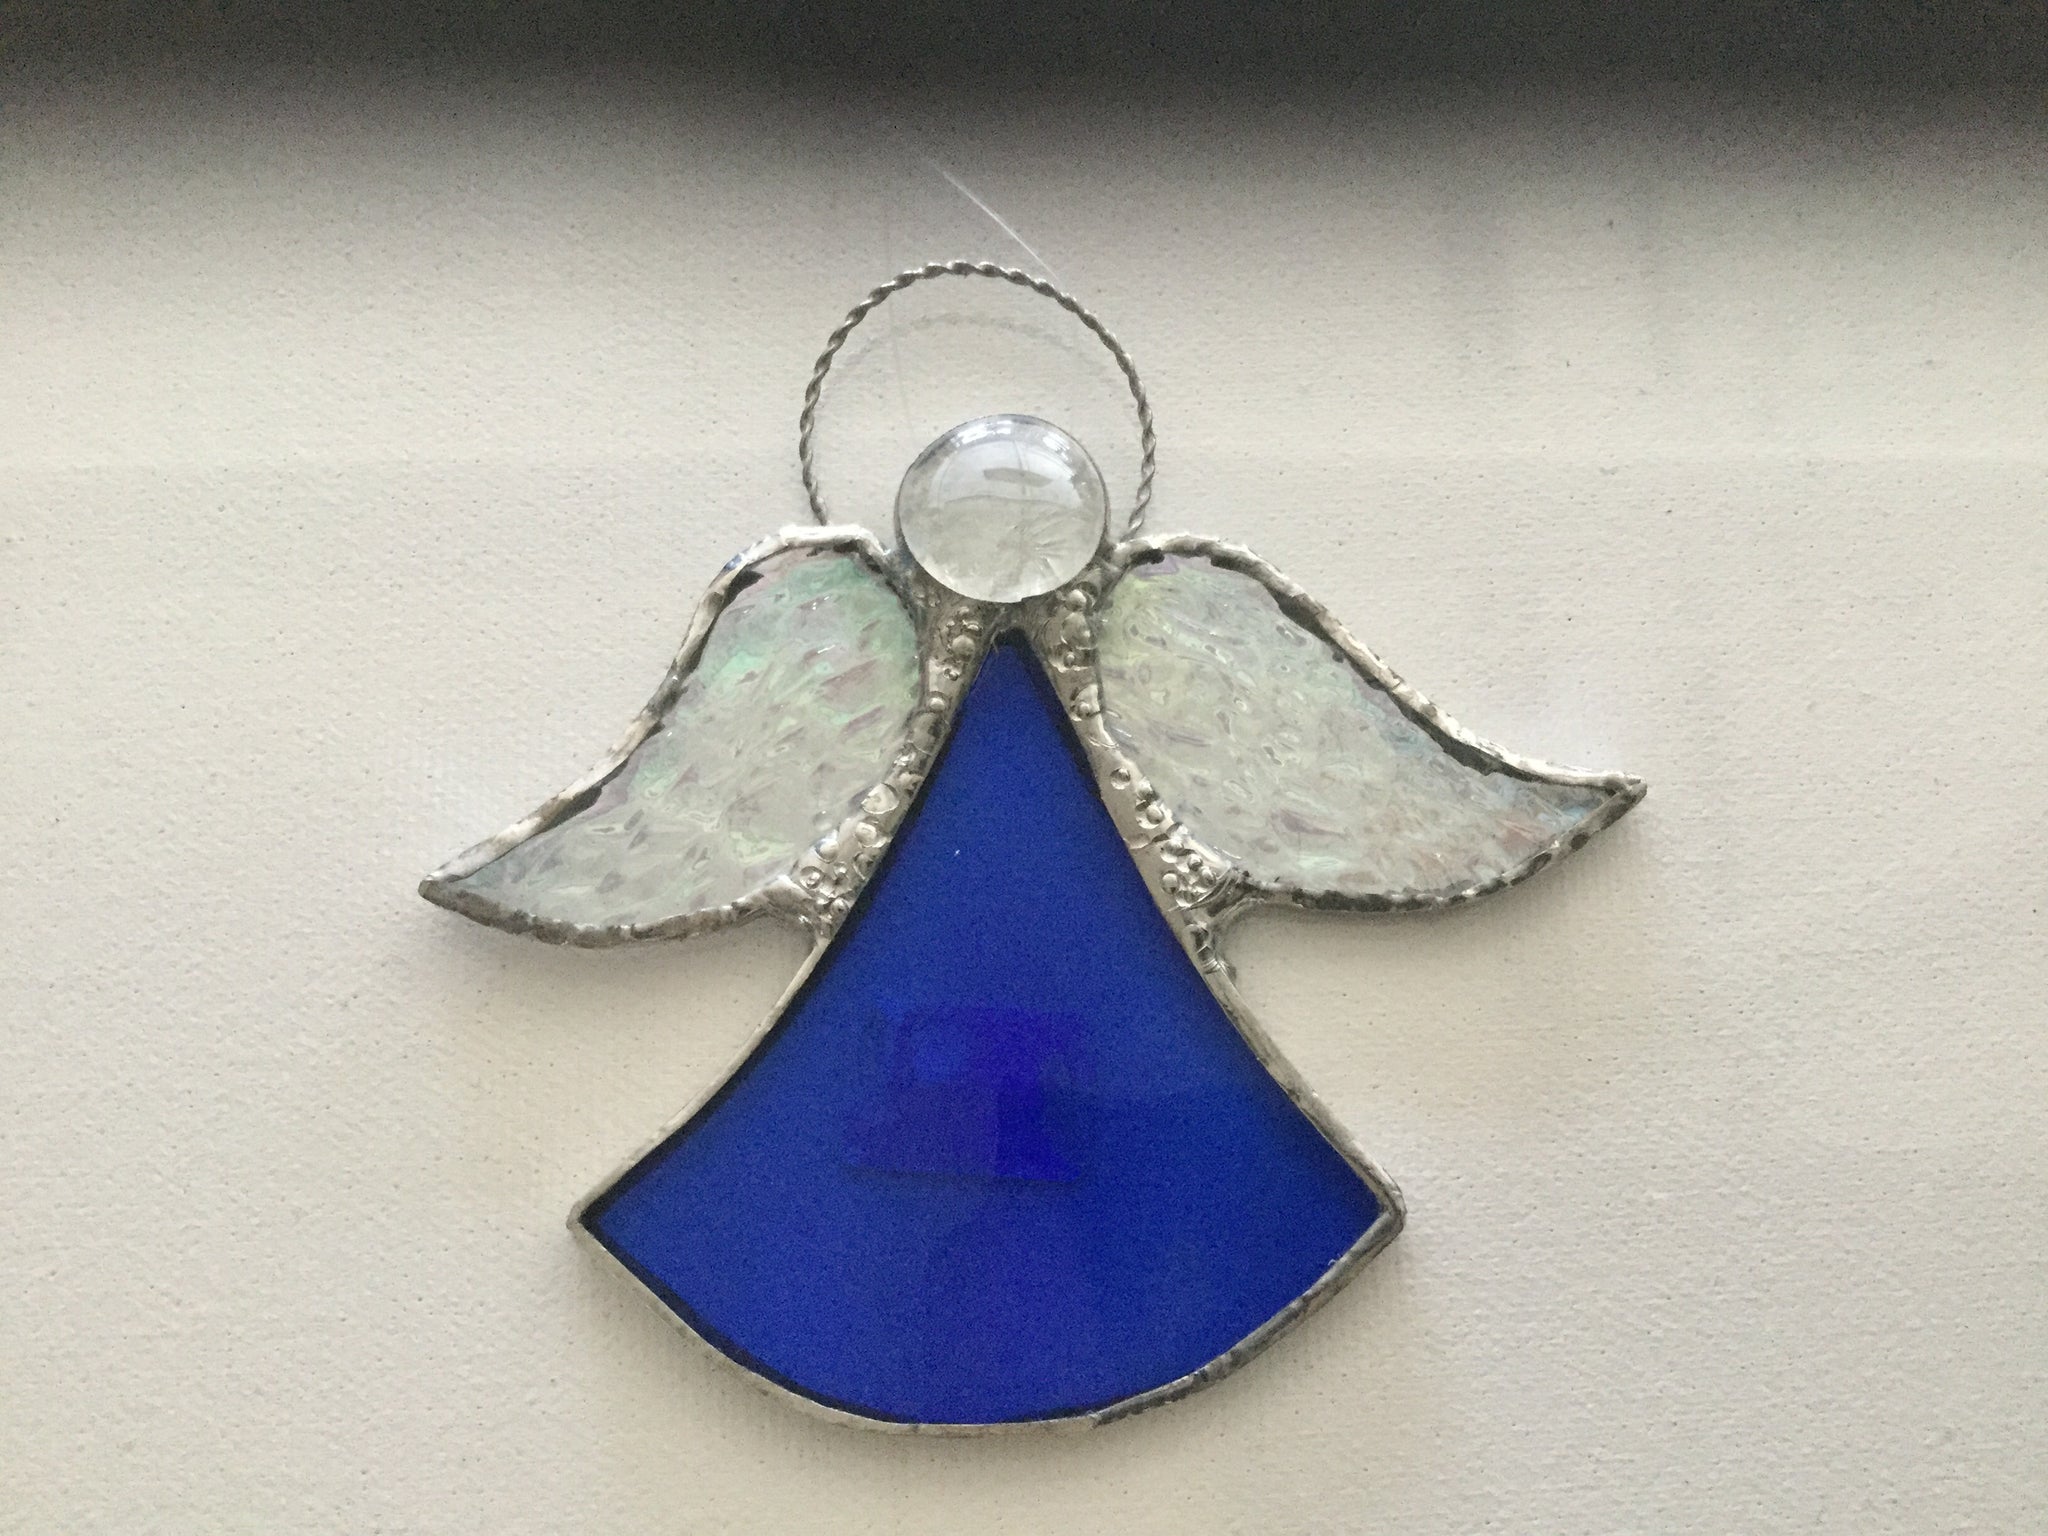 Stained glass angels 3 1/2”